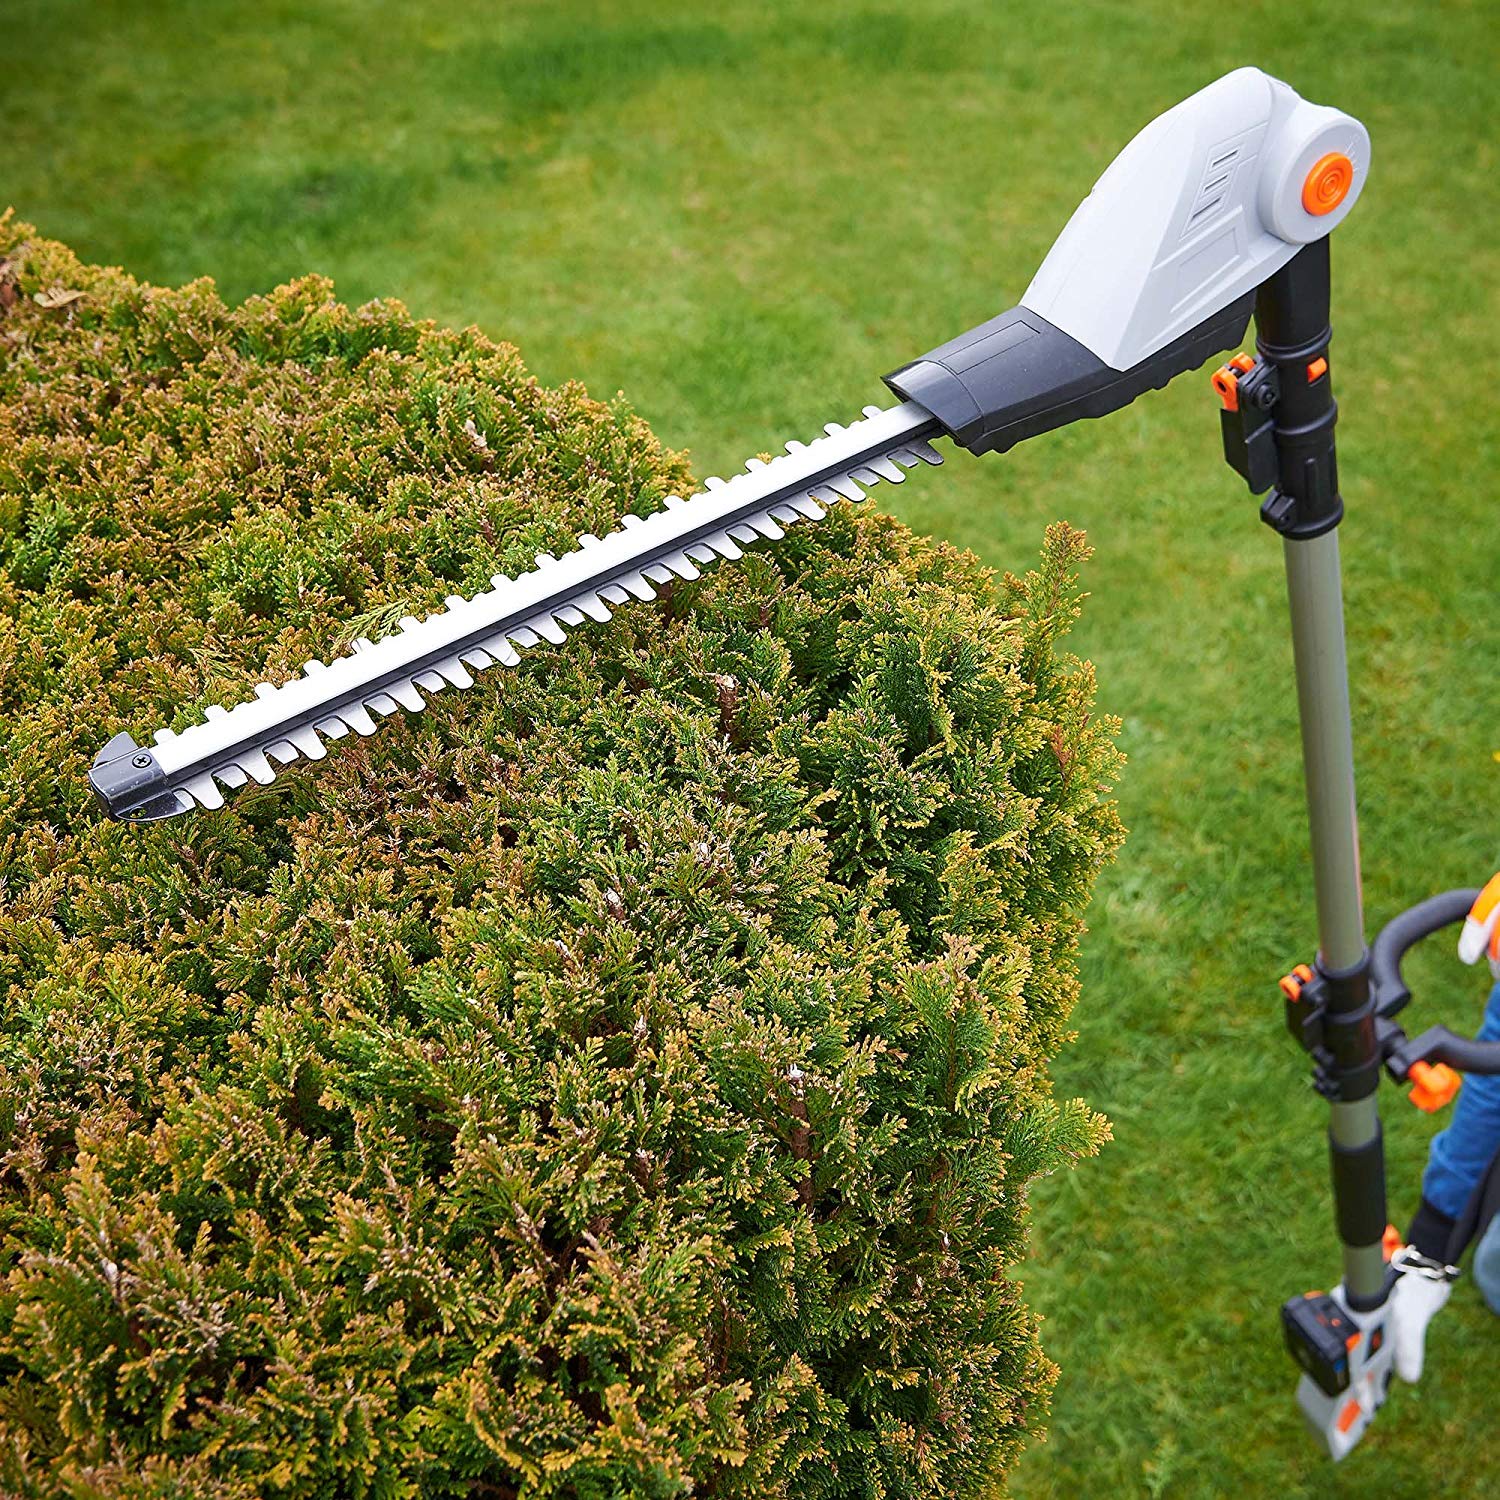 The Best Cordless Hedge Trimmers for 2021 Who Makes the Best Trimmer